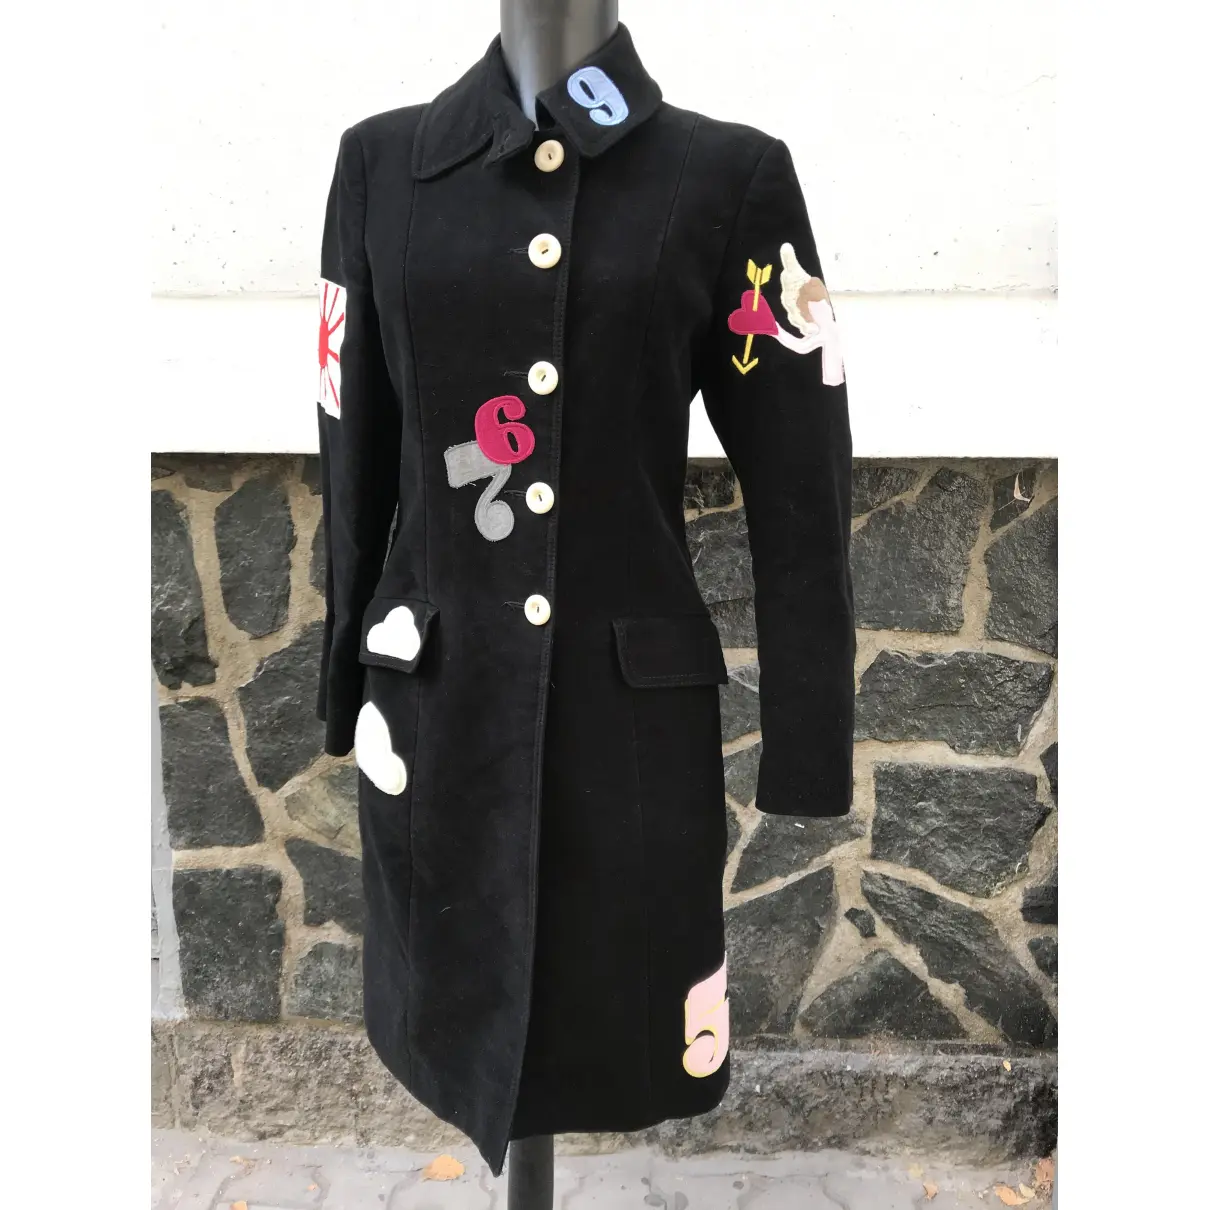 Buy Moschino Cheap And Chic Coat online - Vintage